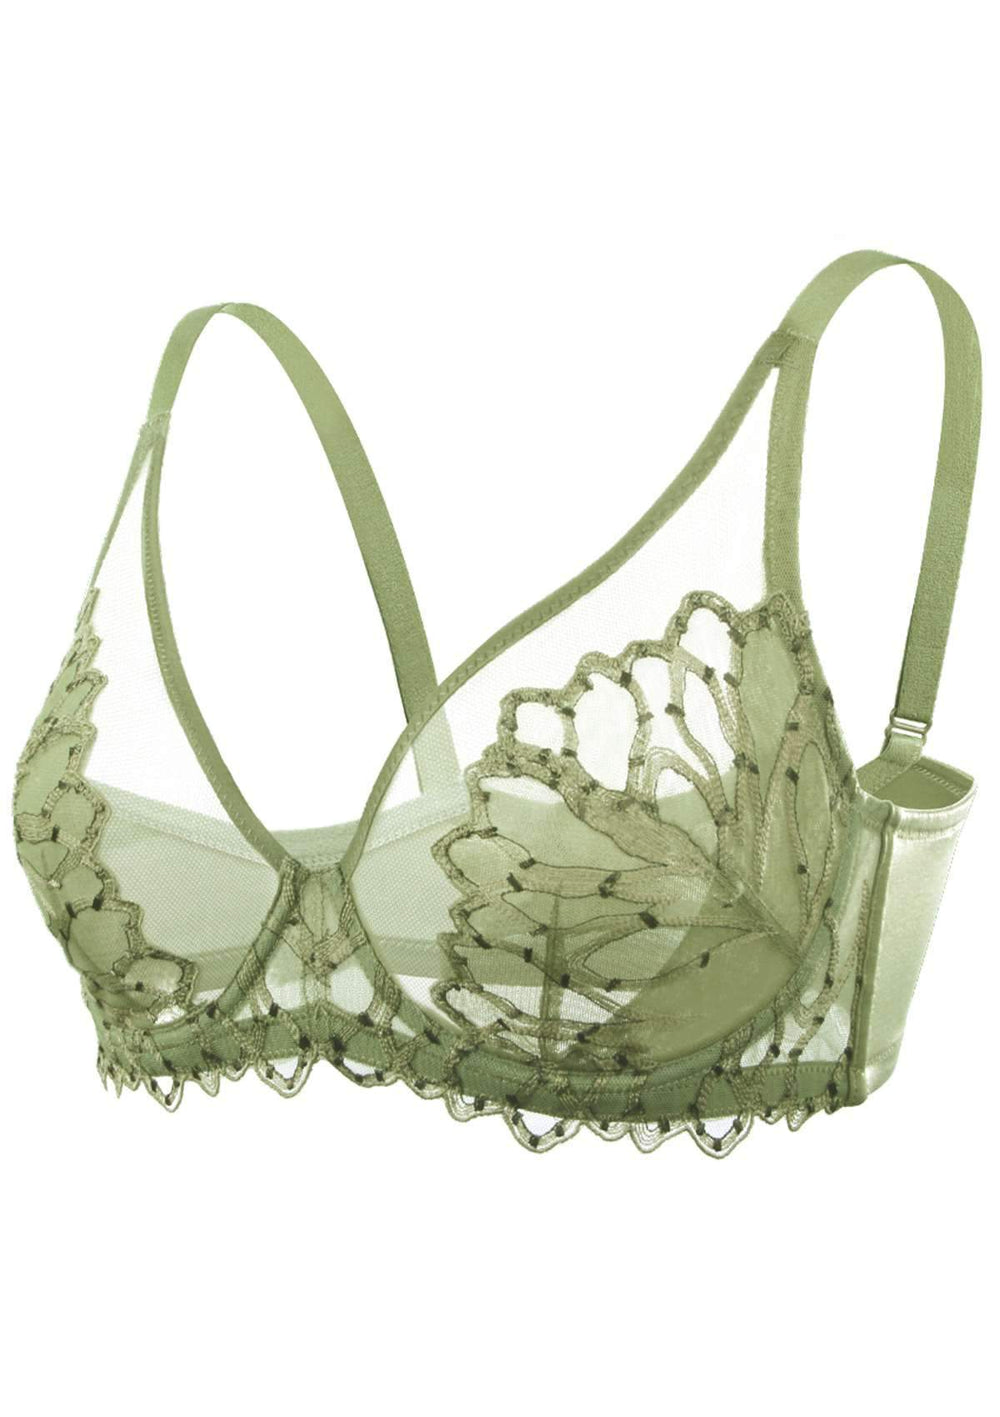 HSIA Chrysanthemum Plus Size Lace Bra: Back Support Bra for